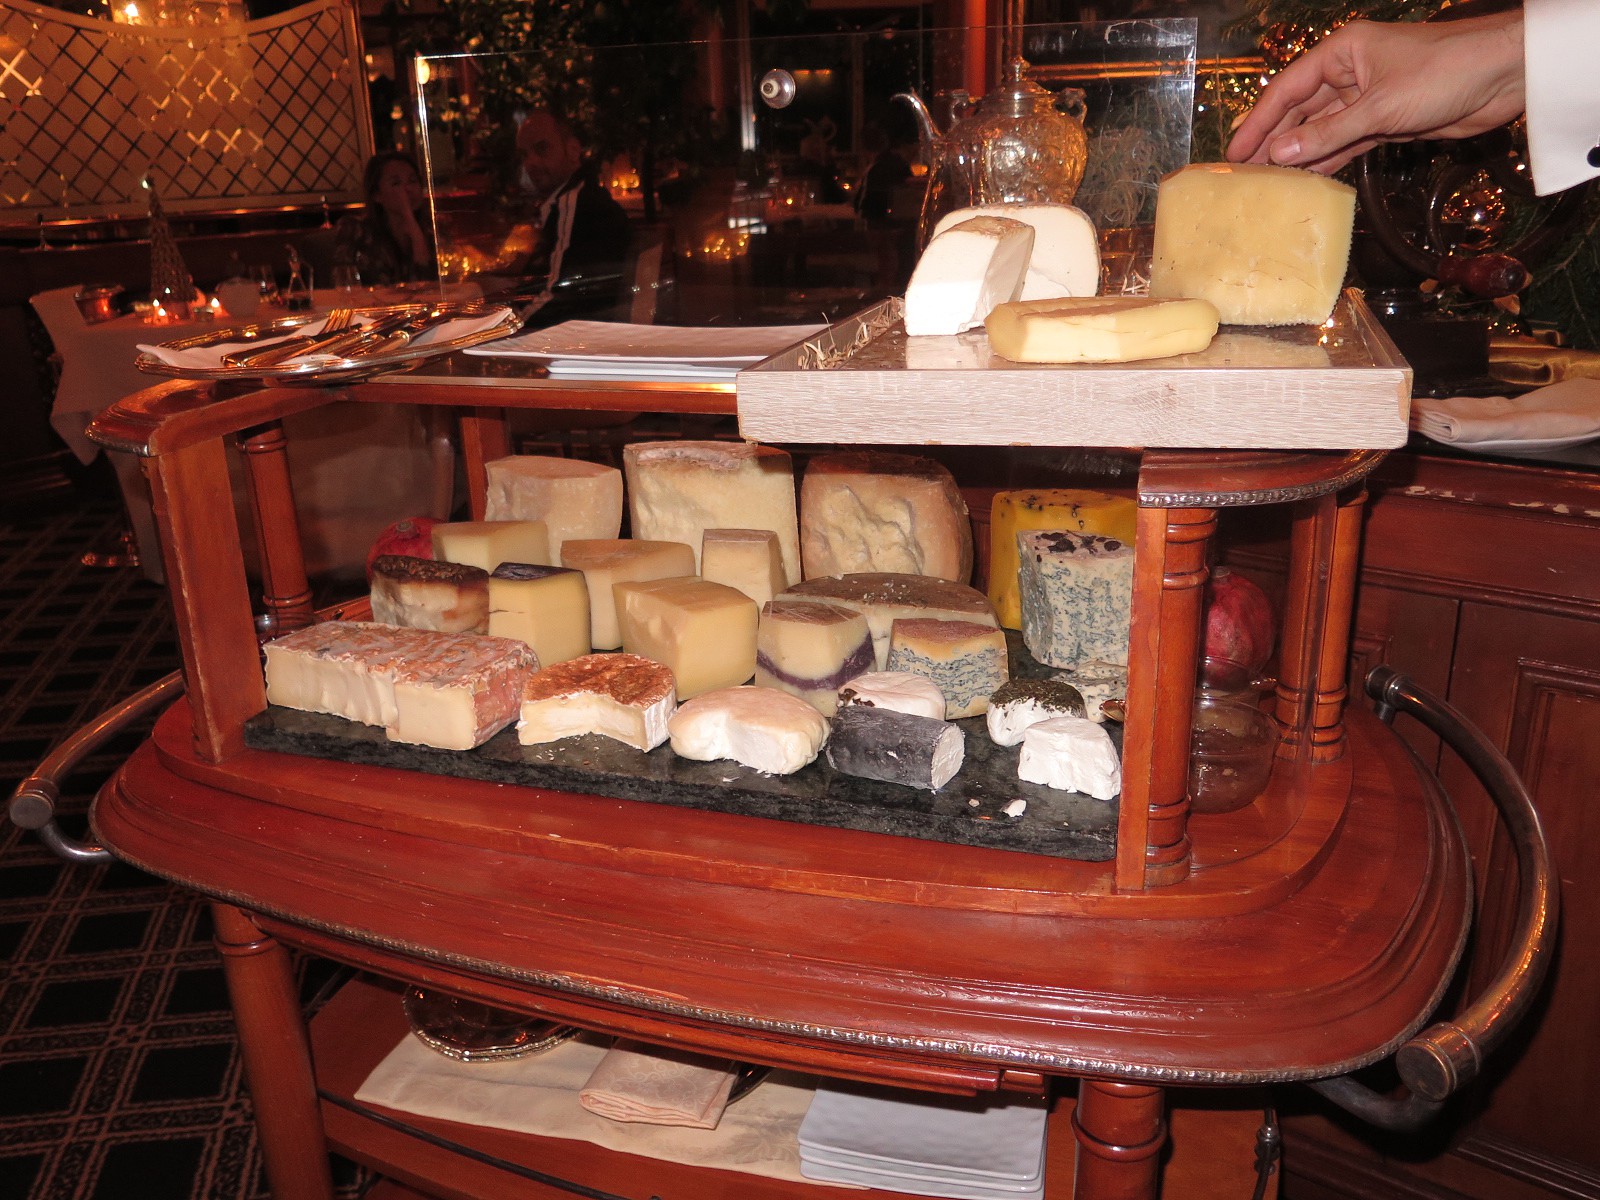 A fine selection of cheese from the trolley